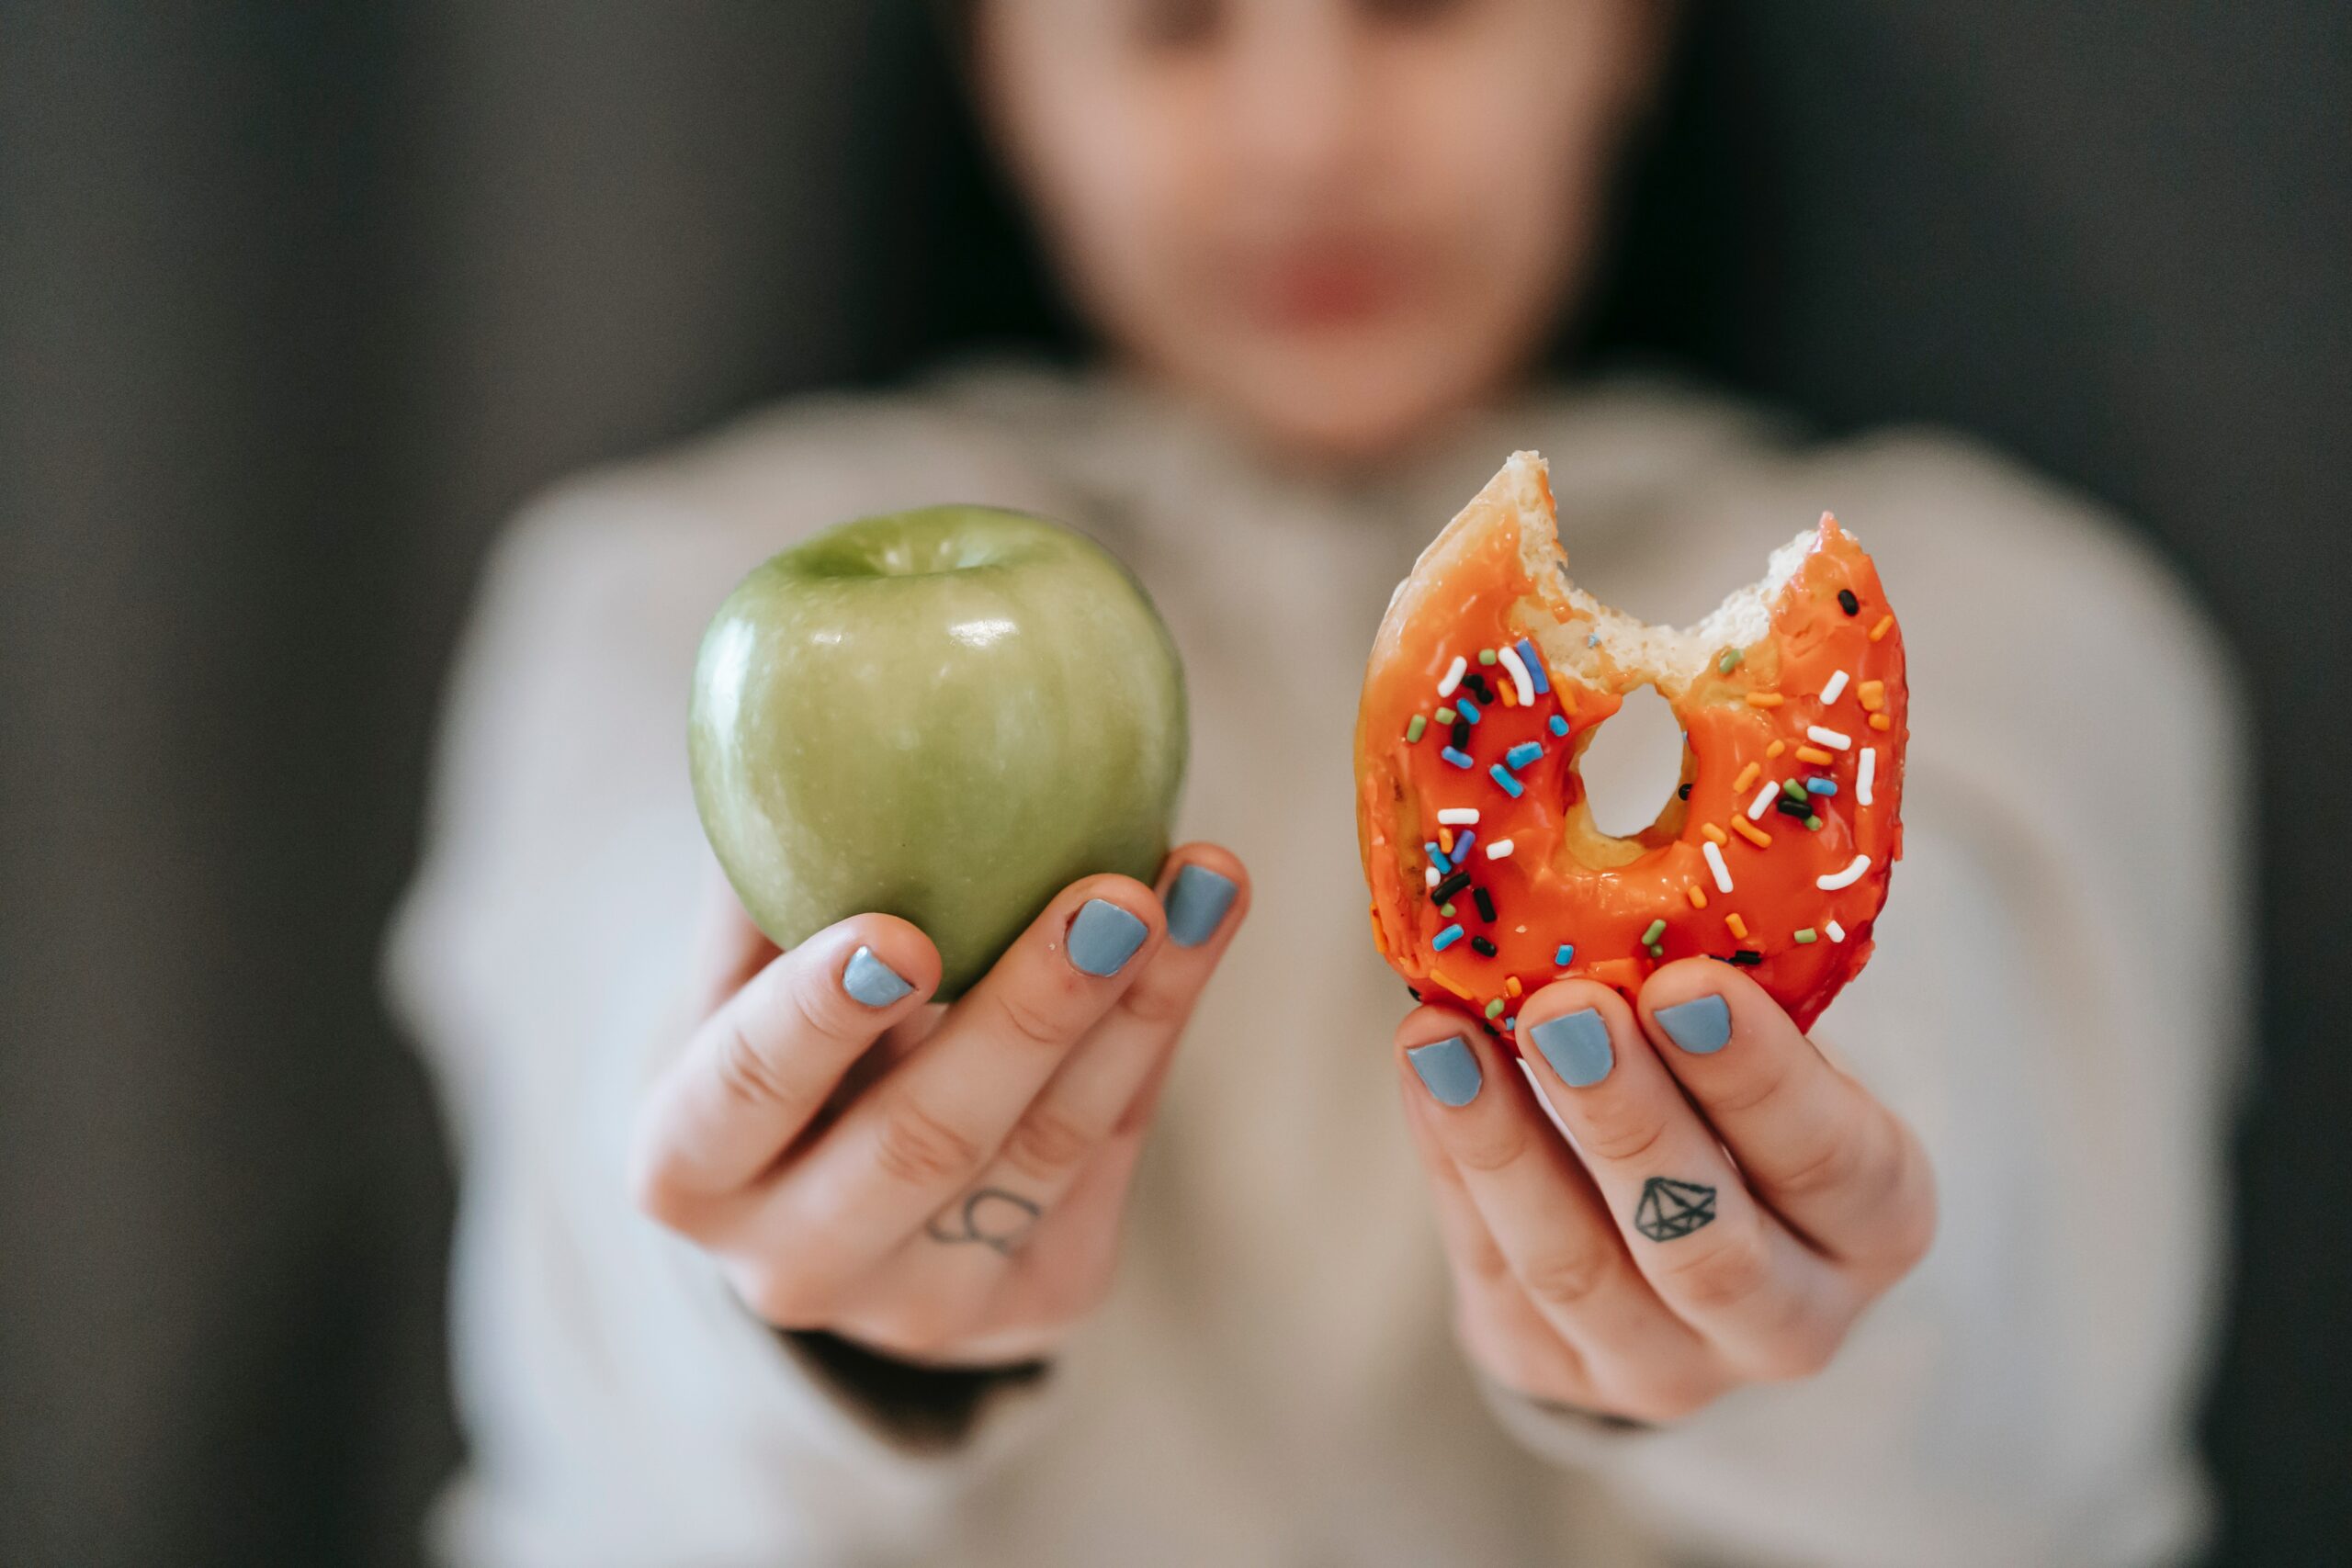 holding-an-apple-and-a-donut